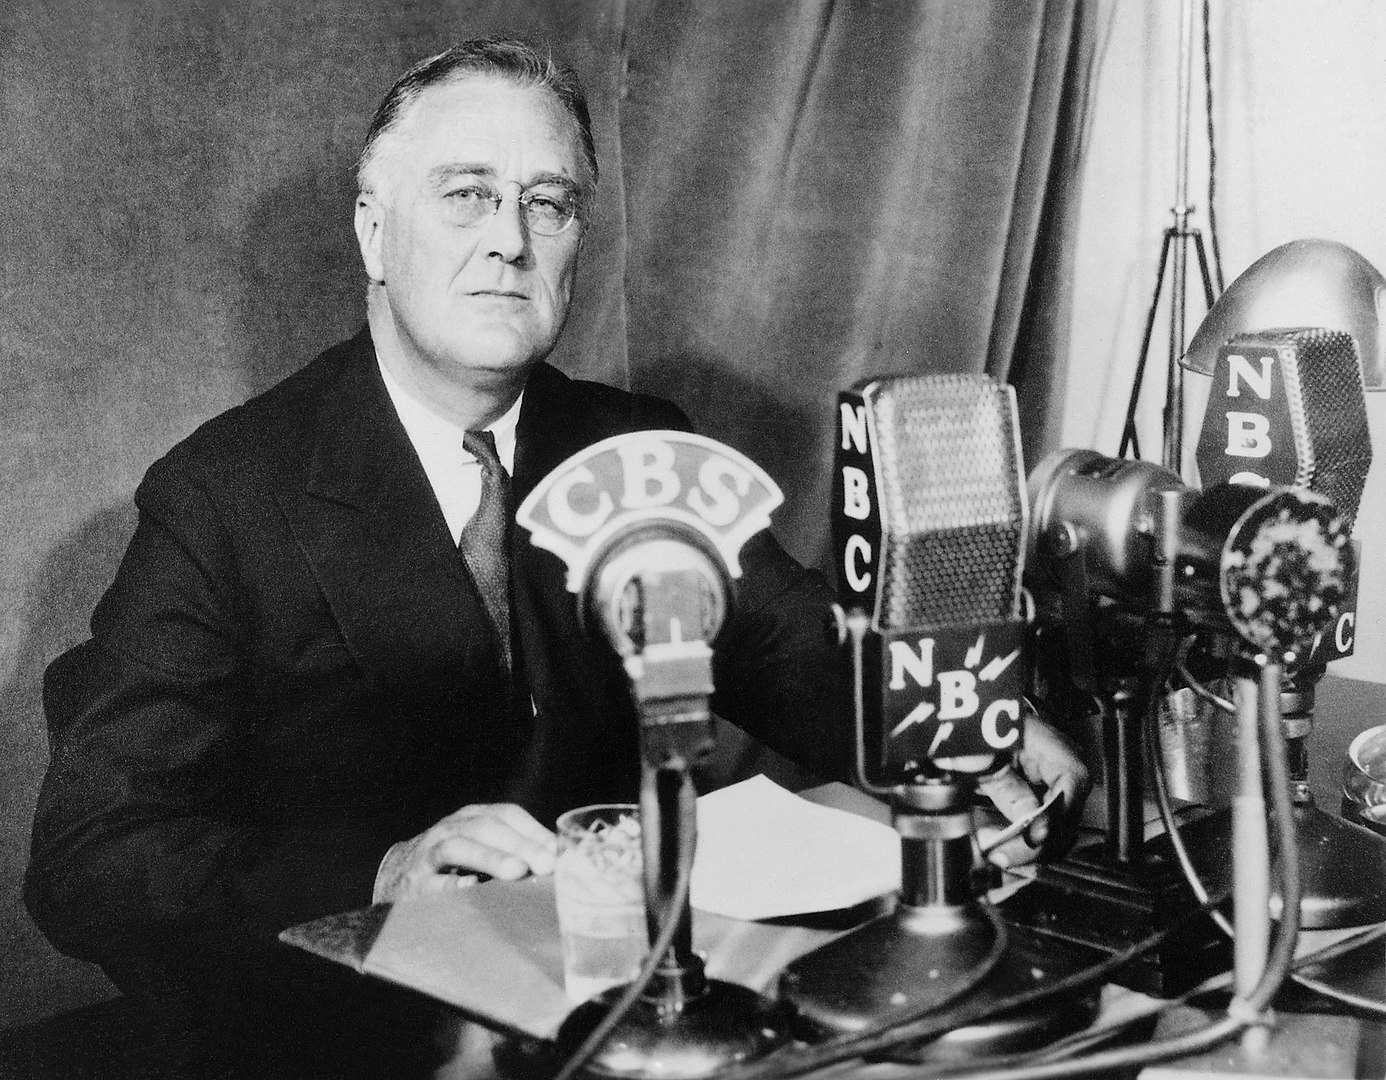 fdr fireside chats national archives